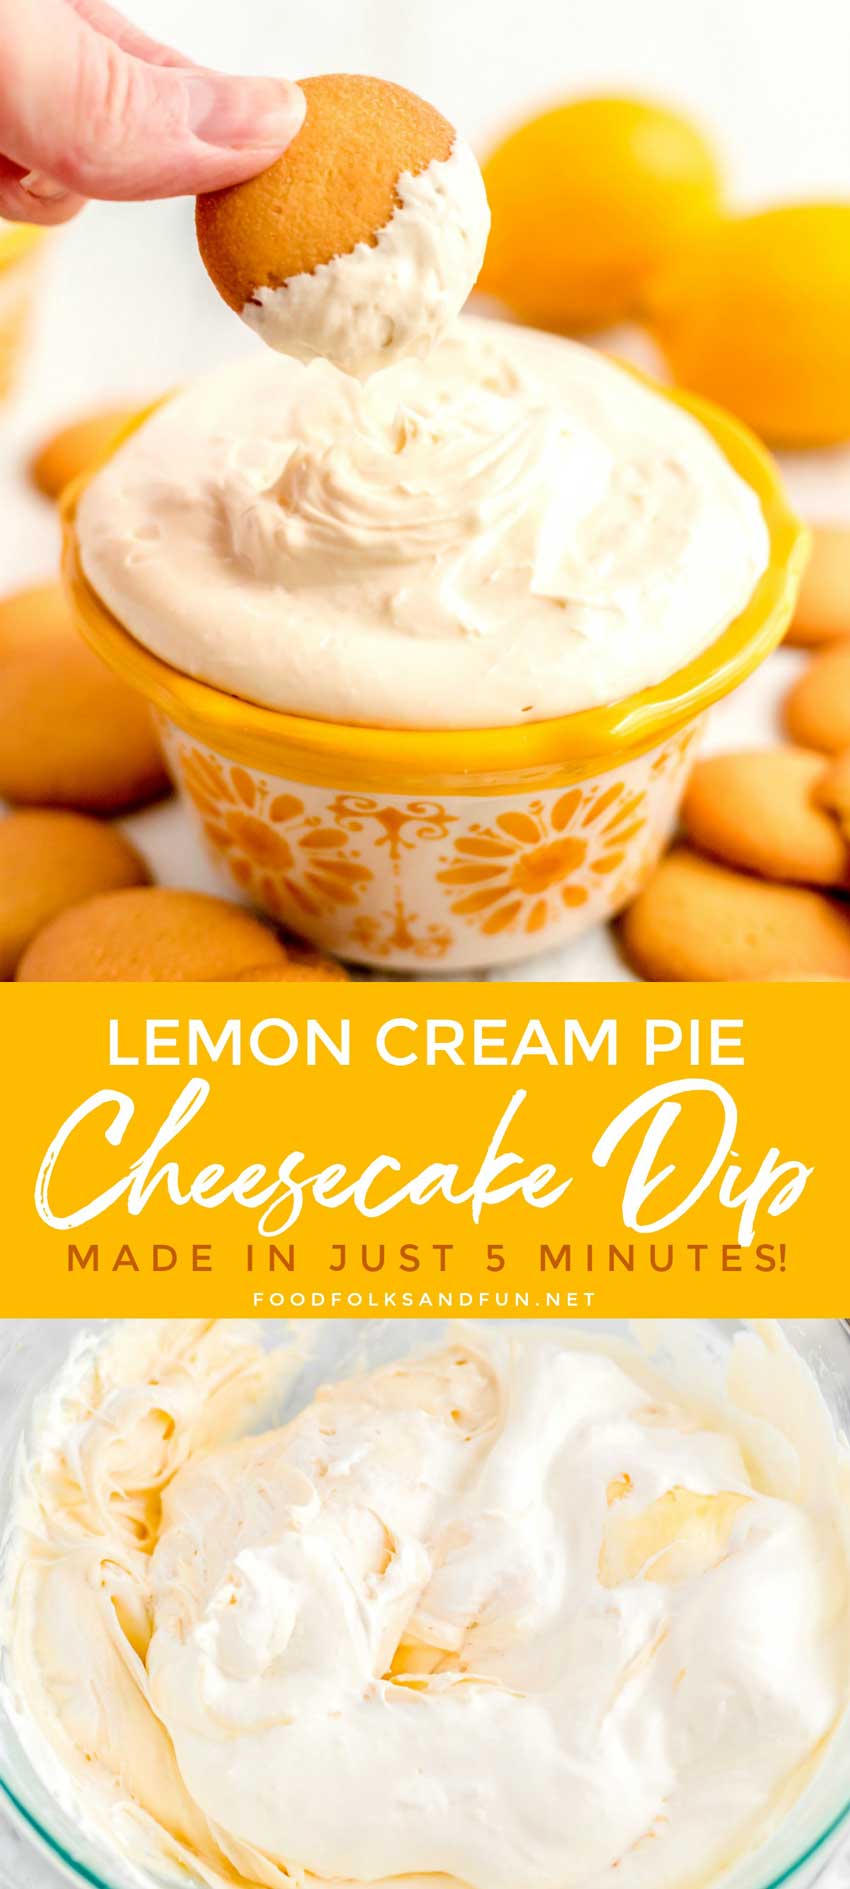 This Lemon Cream Pie Cheesecake Dip is a dessert that is made for dippable portability! It has the perfect balance of tangy lemon and sweet, fluffy cream. #Lemon #LemonDessert #LemonDip #LemonRecipe #EasyRecipe #Spring #SpringRecipe #foodfolksandfun via @foodfolksandfun